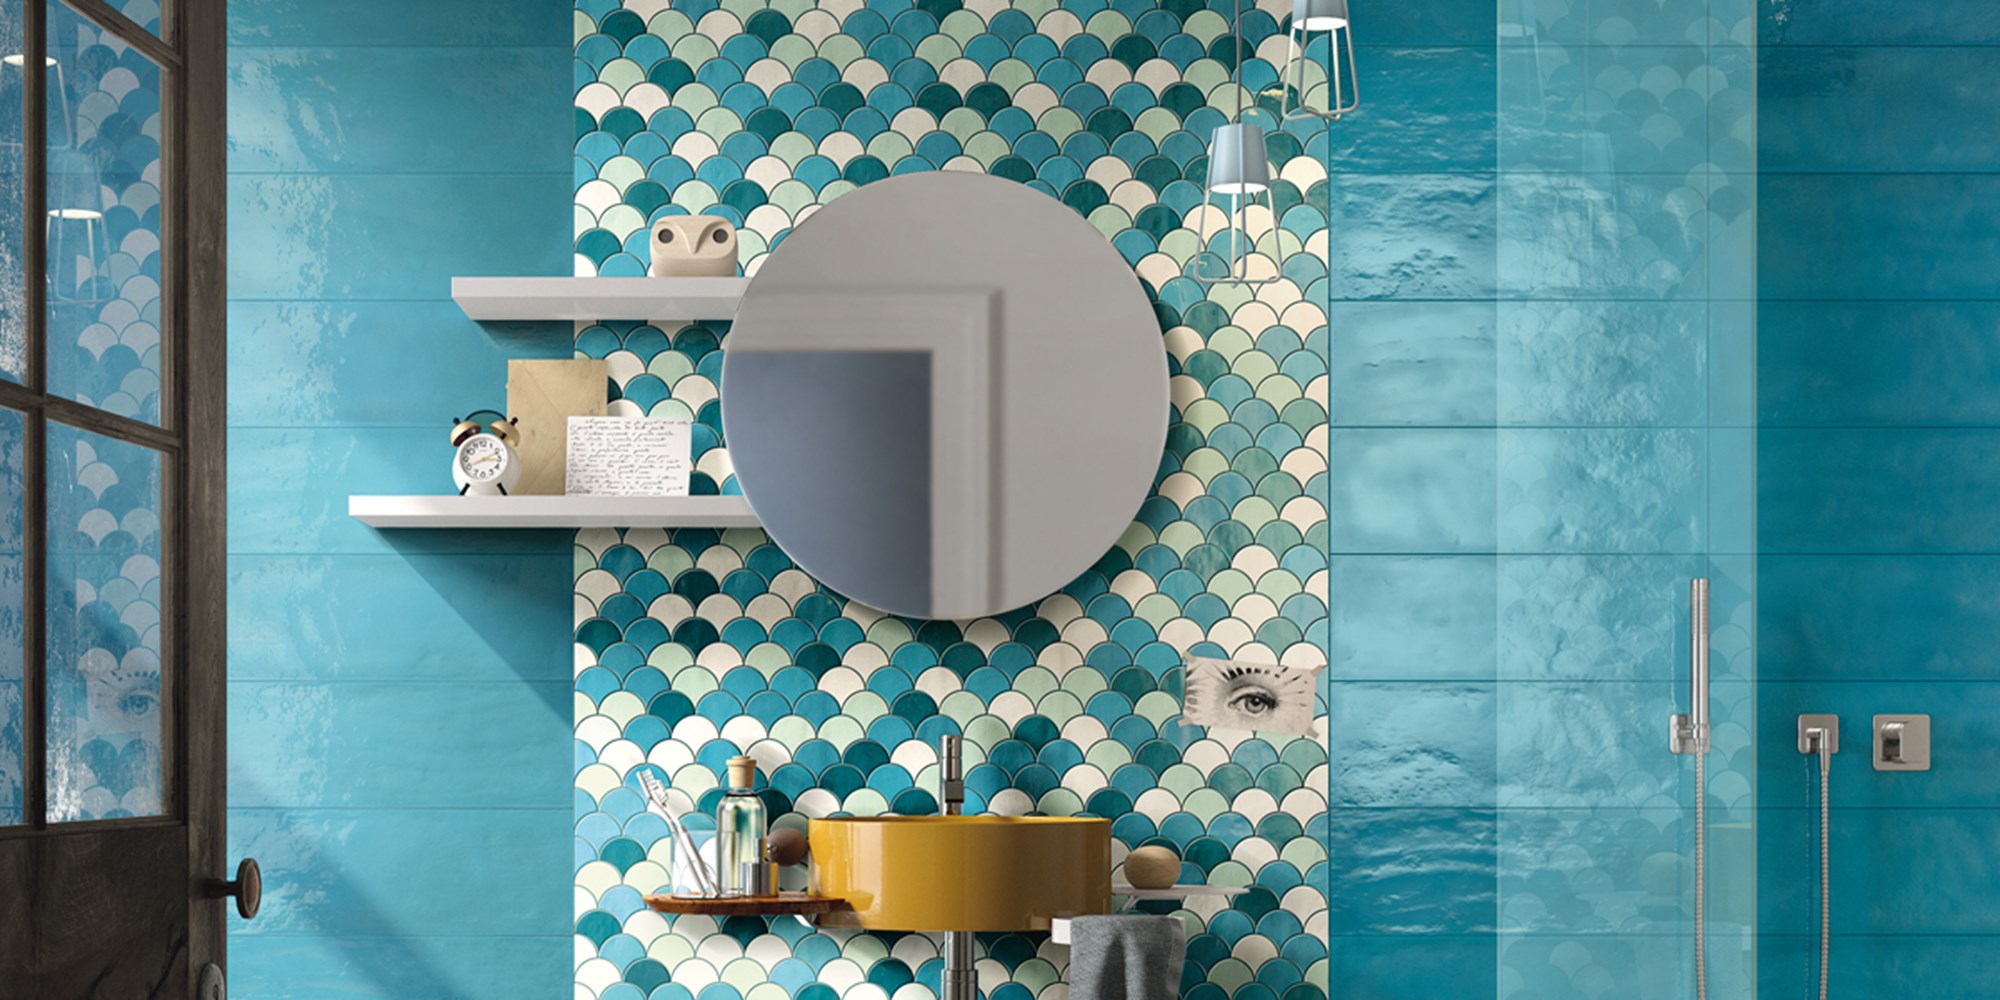 Double fired mosaic Tiles by Imola